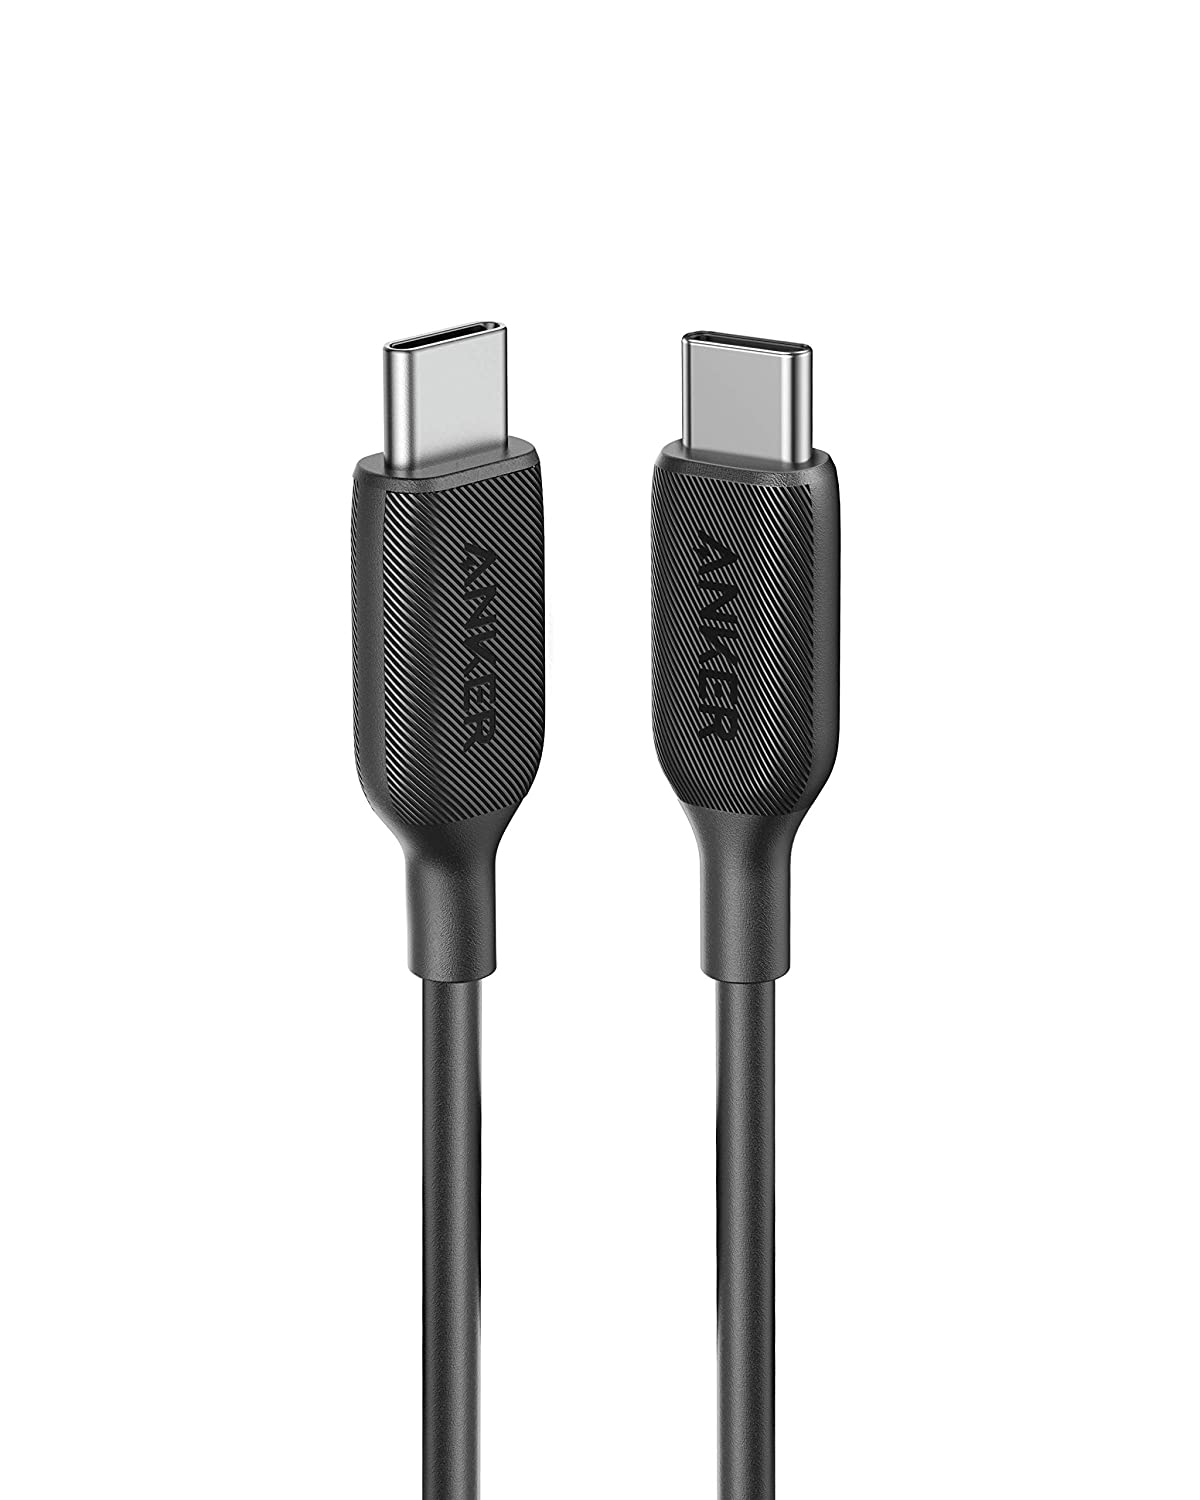 Anker Powerline III USB C Cable 2.0 60W 3ft, White/Black